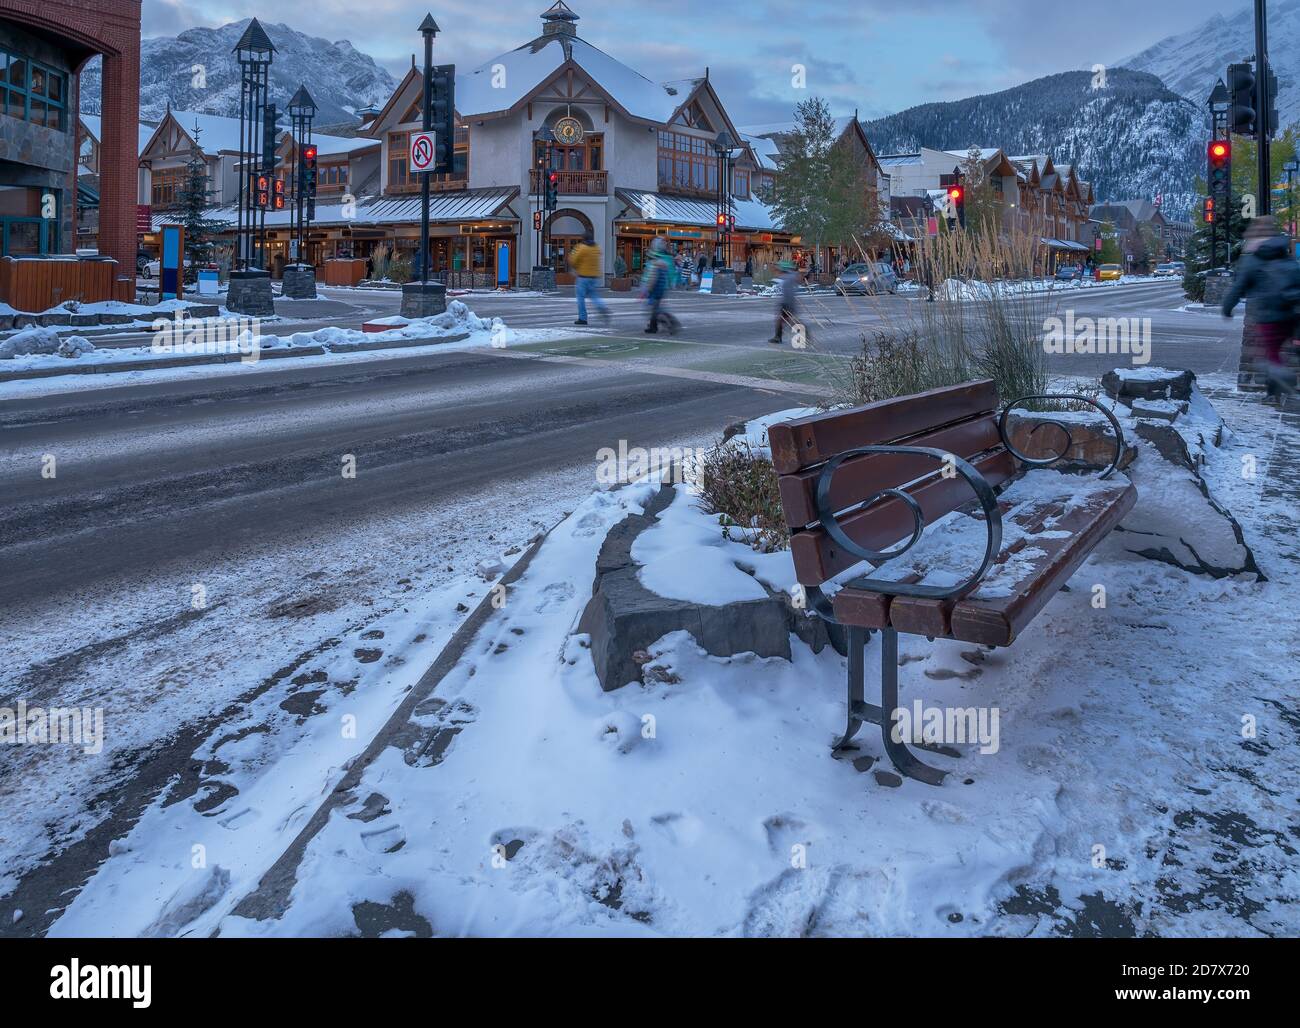 Evening view of a street bench, pedestrians and stores on Banff Avenue in Banff, Alberta, Canada Stock Photo